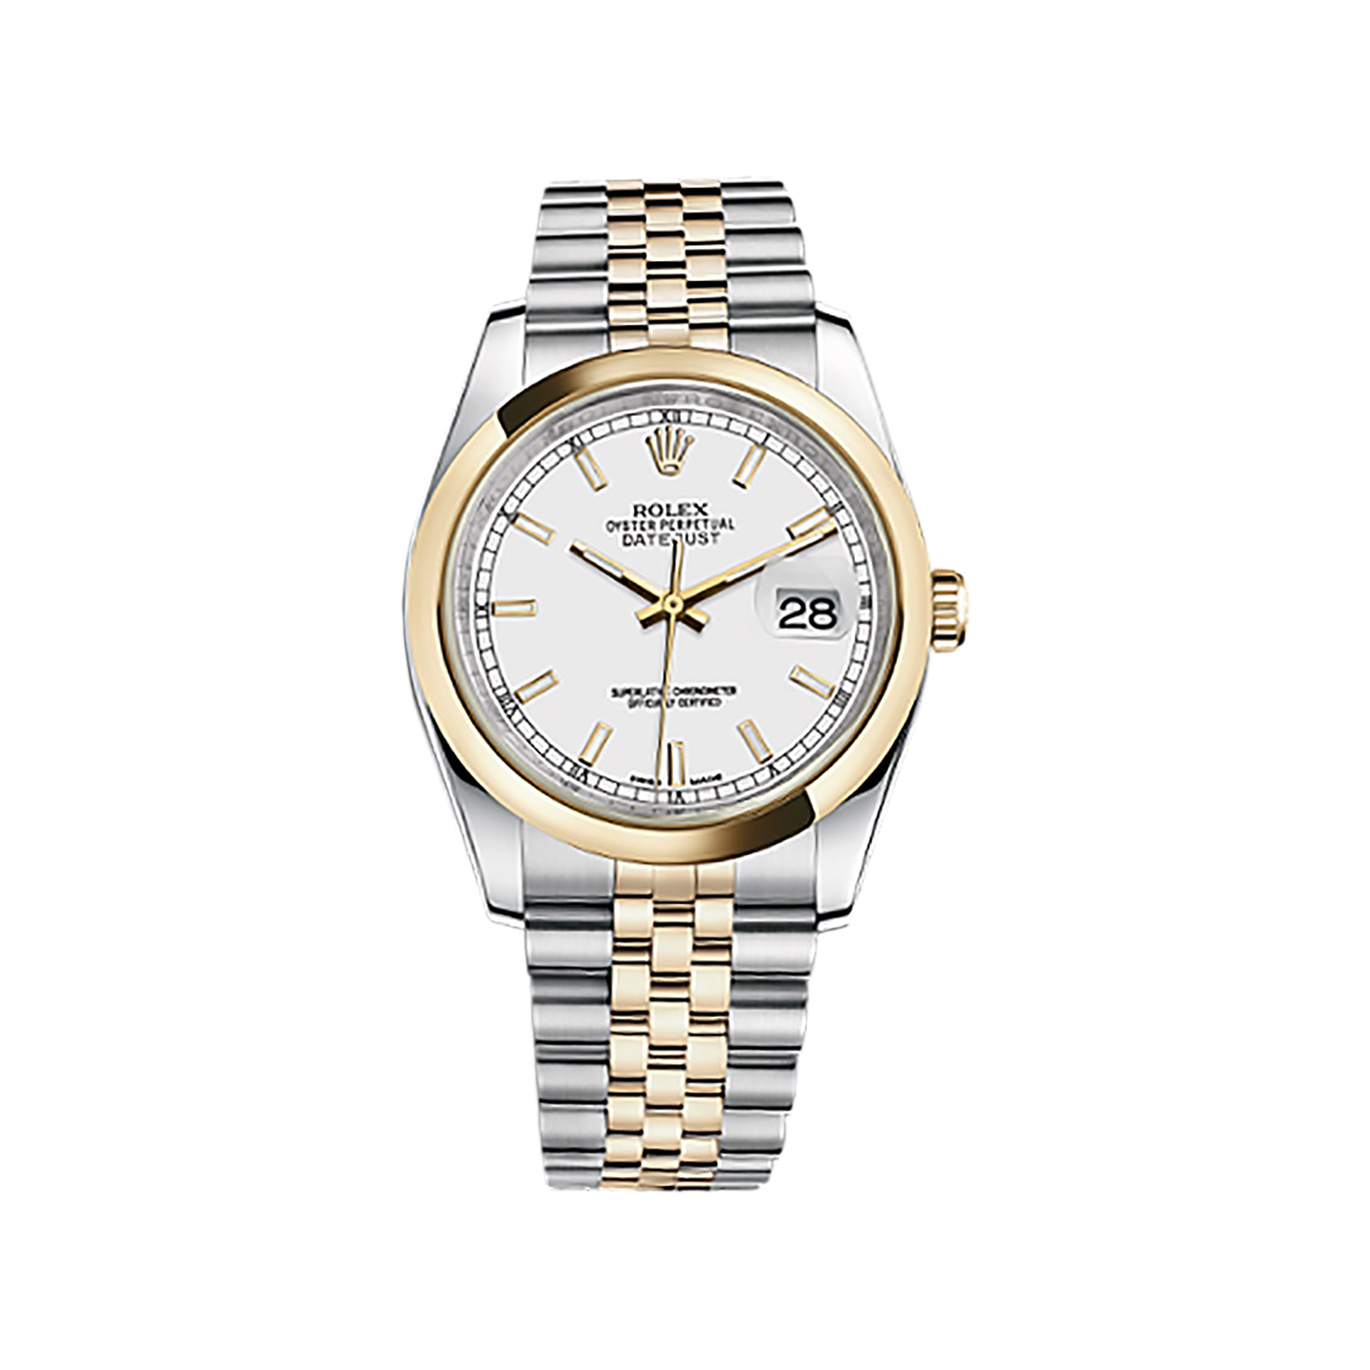 Datejust 36 116203 Gold & Stainless Steel Watch (White) - Click Image to Close